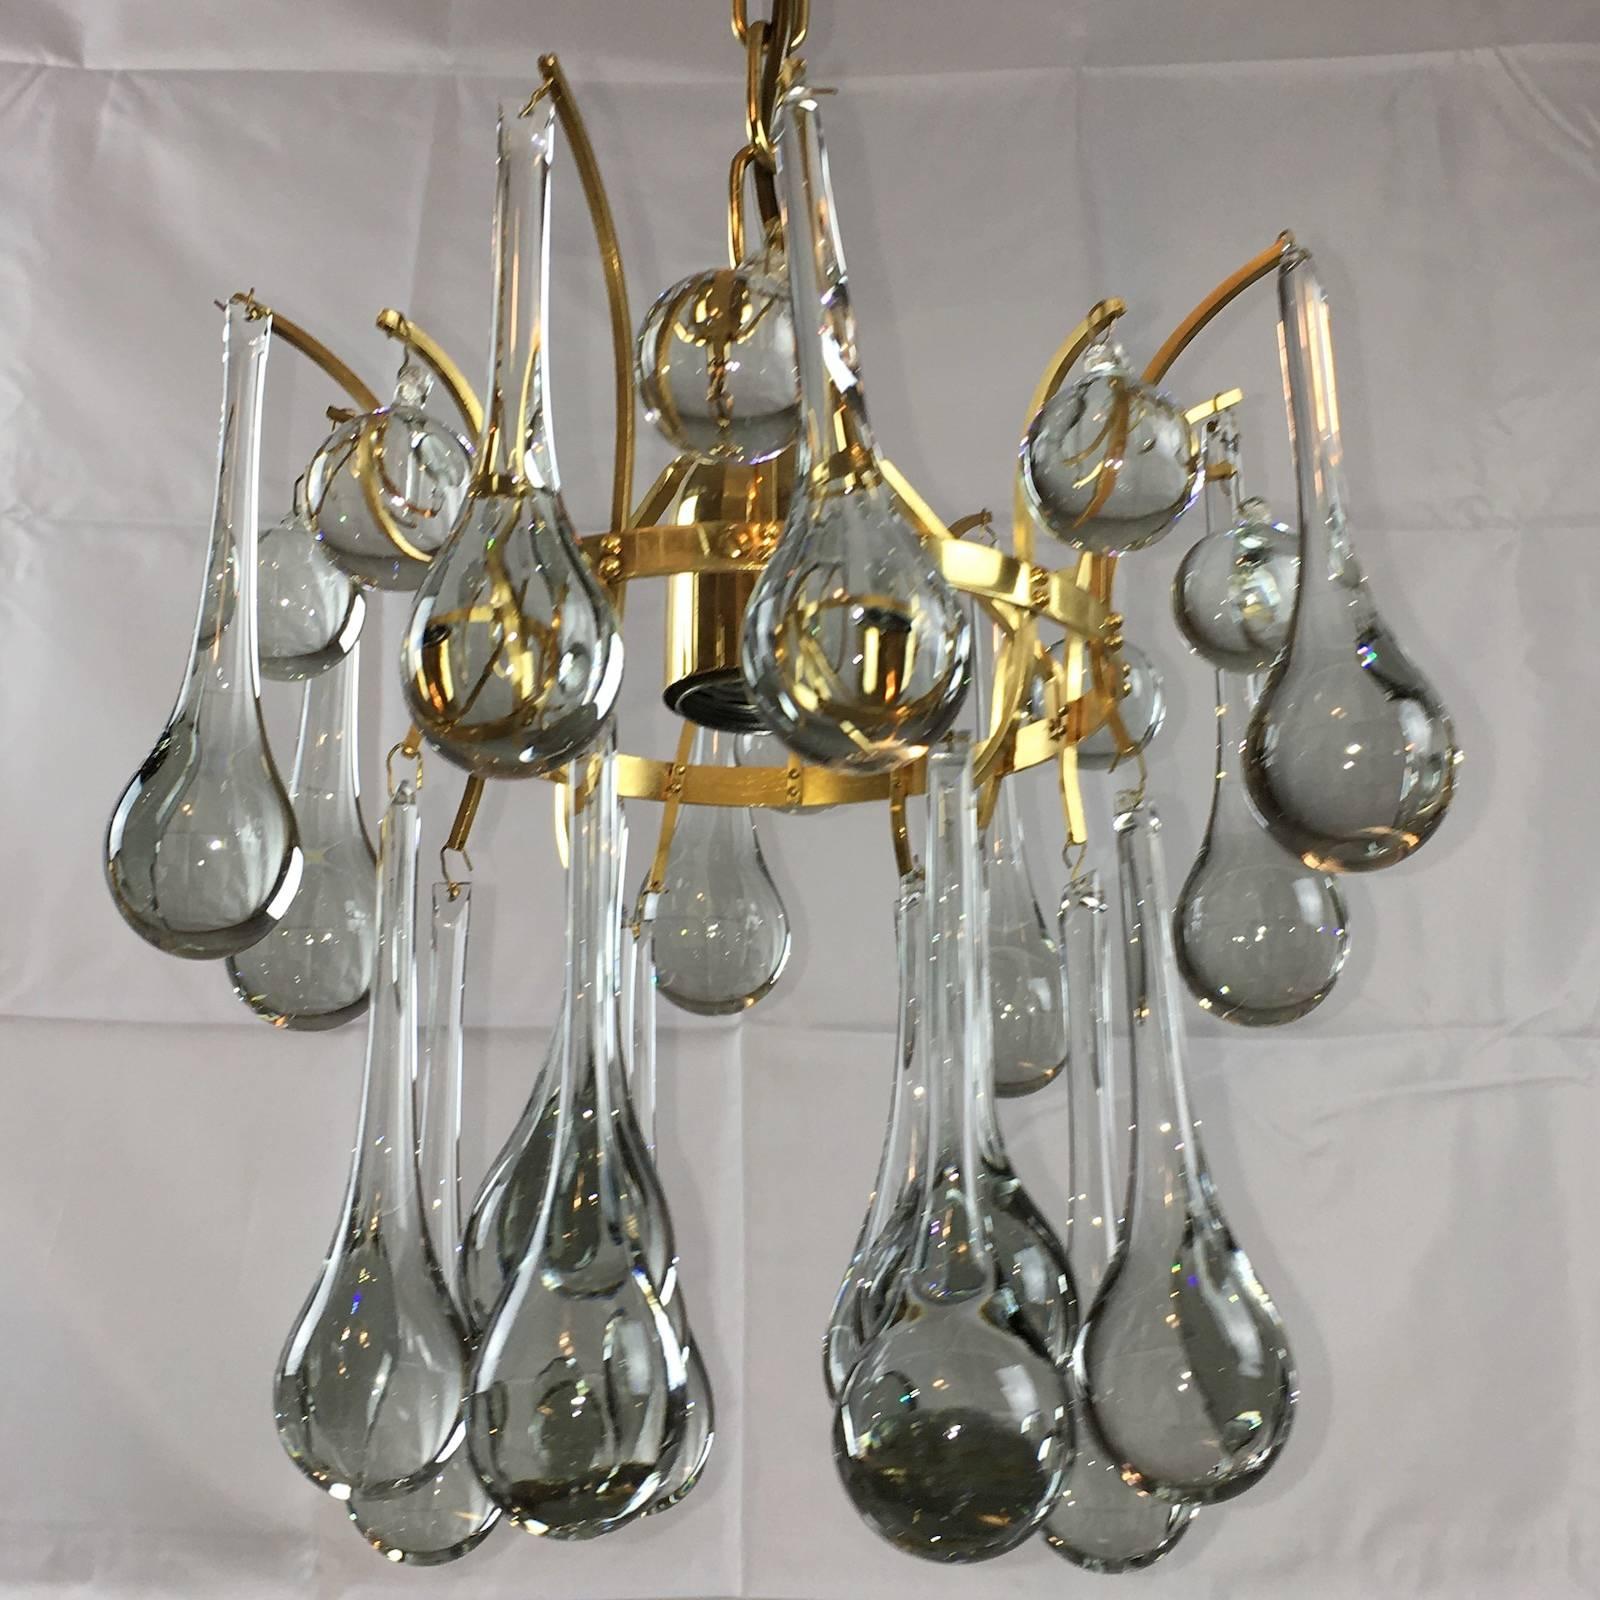 This petite Hollywood-Regency style chandelier was made in the 1970s by Ernst Palme, Germany. The fixture requires one European E27 Edison bulb, each bulb up to 60 watts.